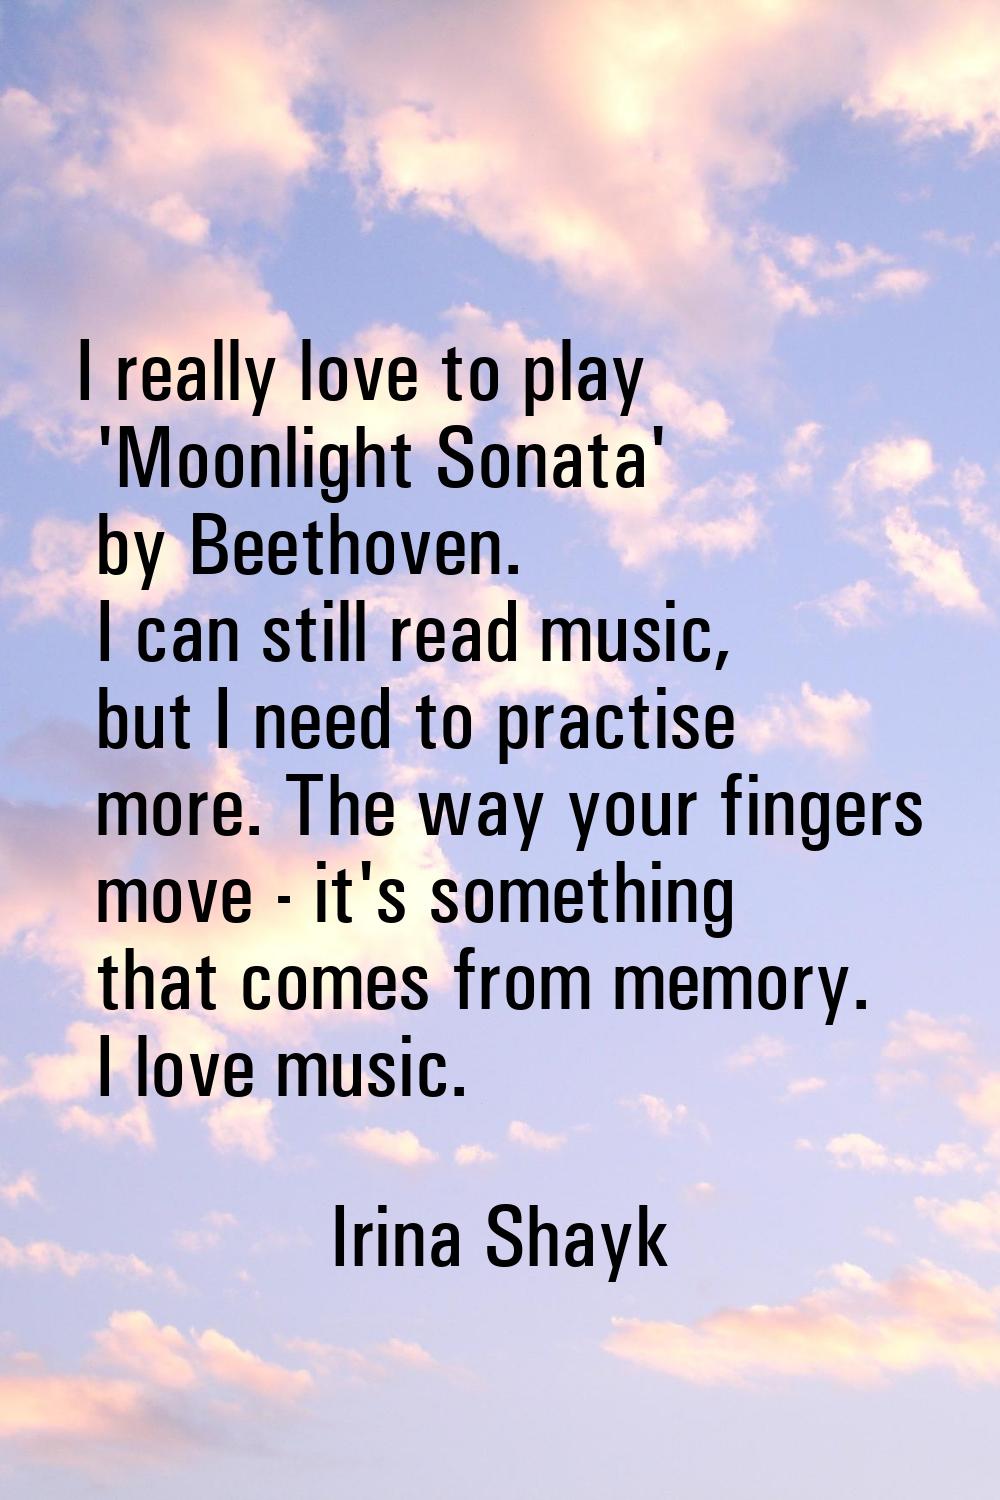 I really love to play 'Moonlight Sonata' by Beethoven. I can still read music, but I need to practi